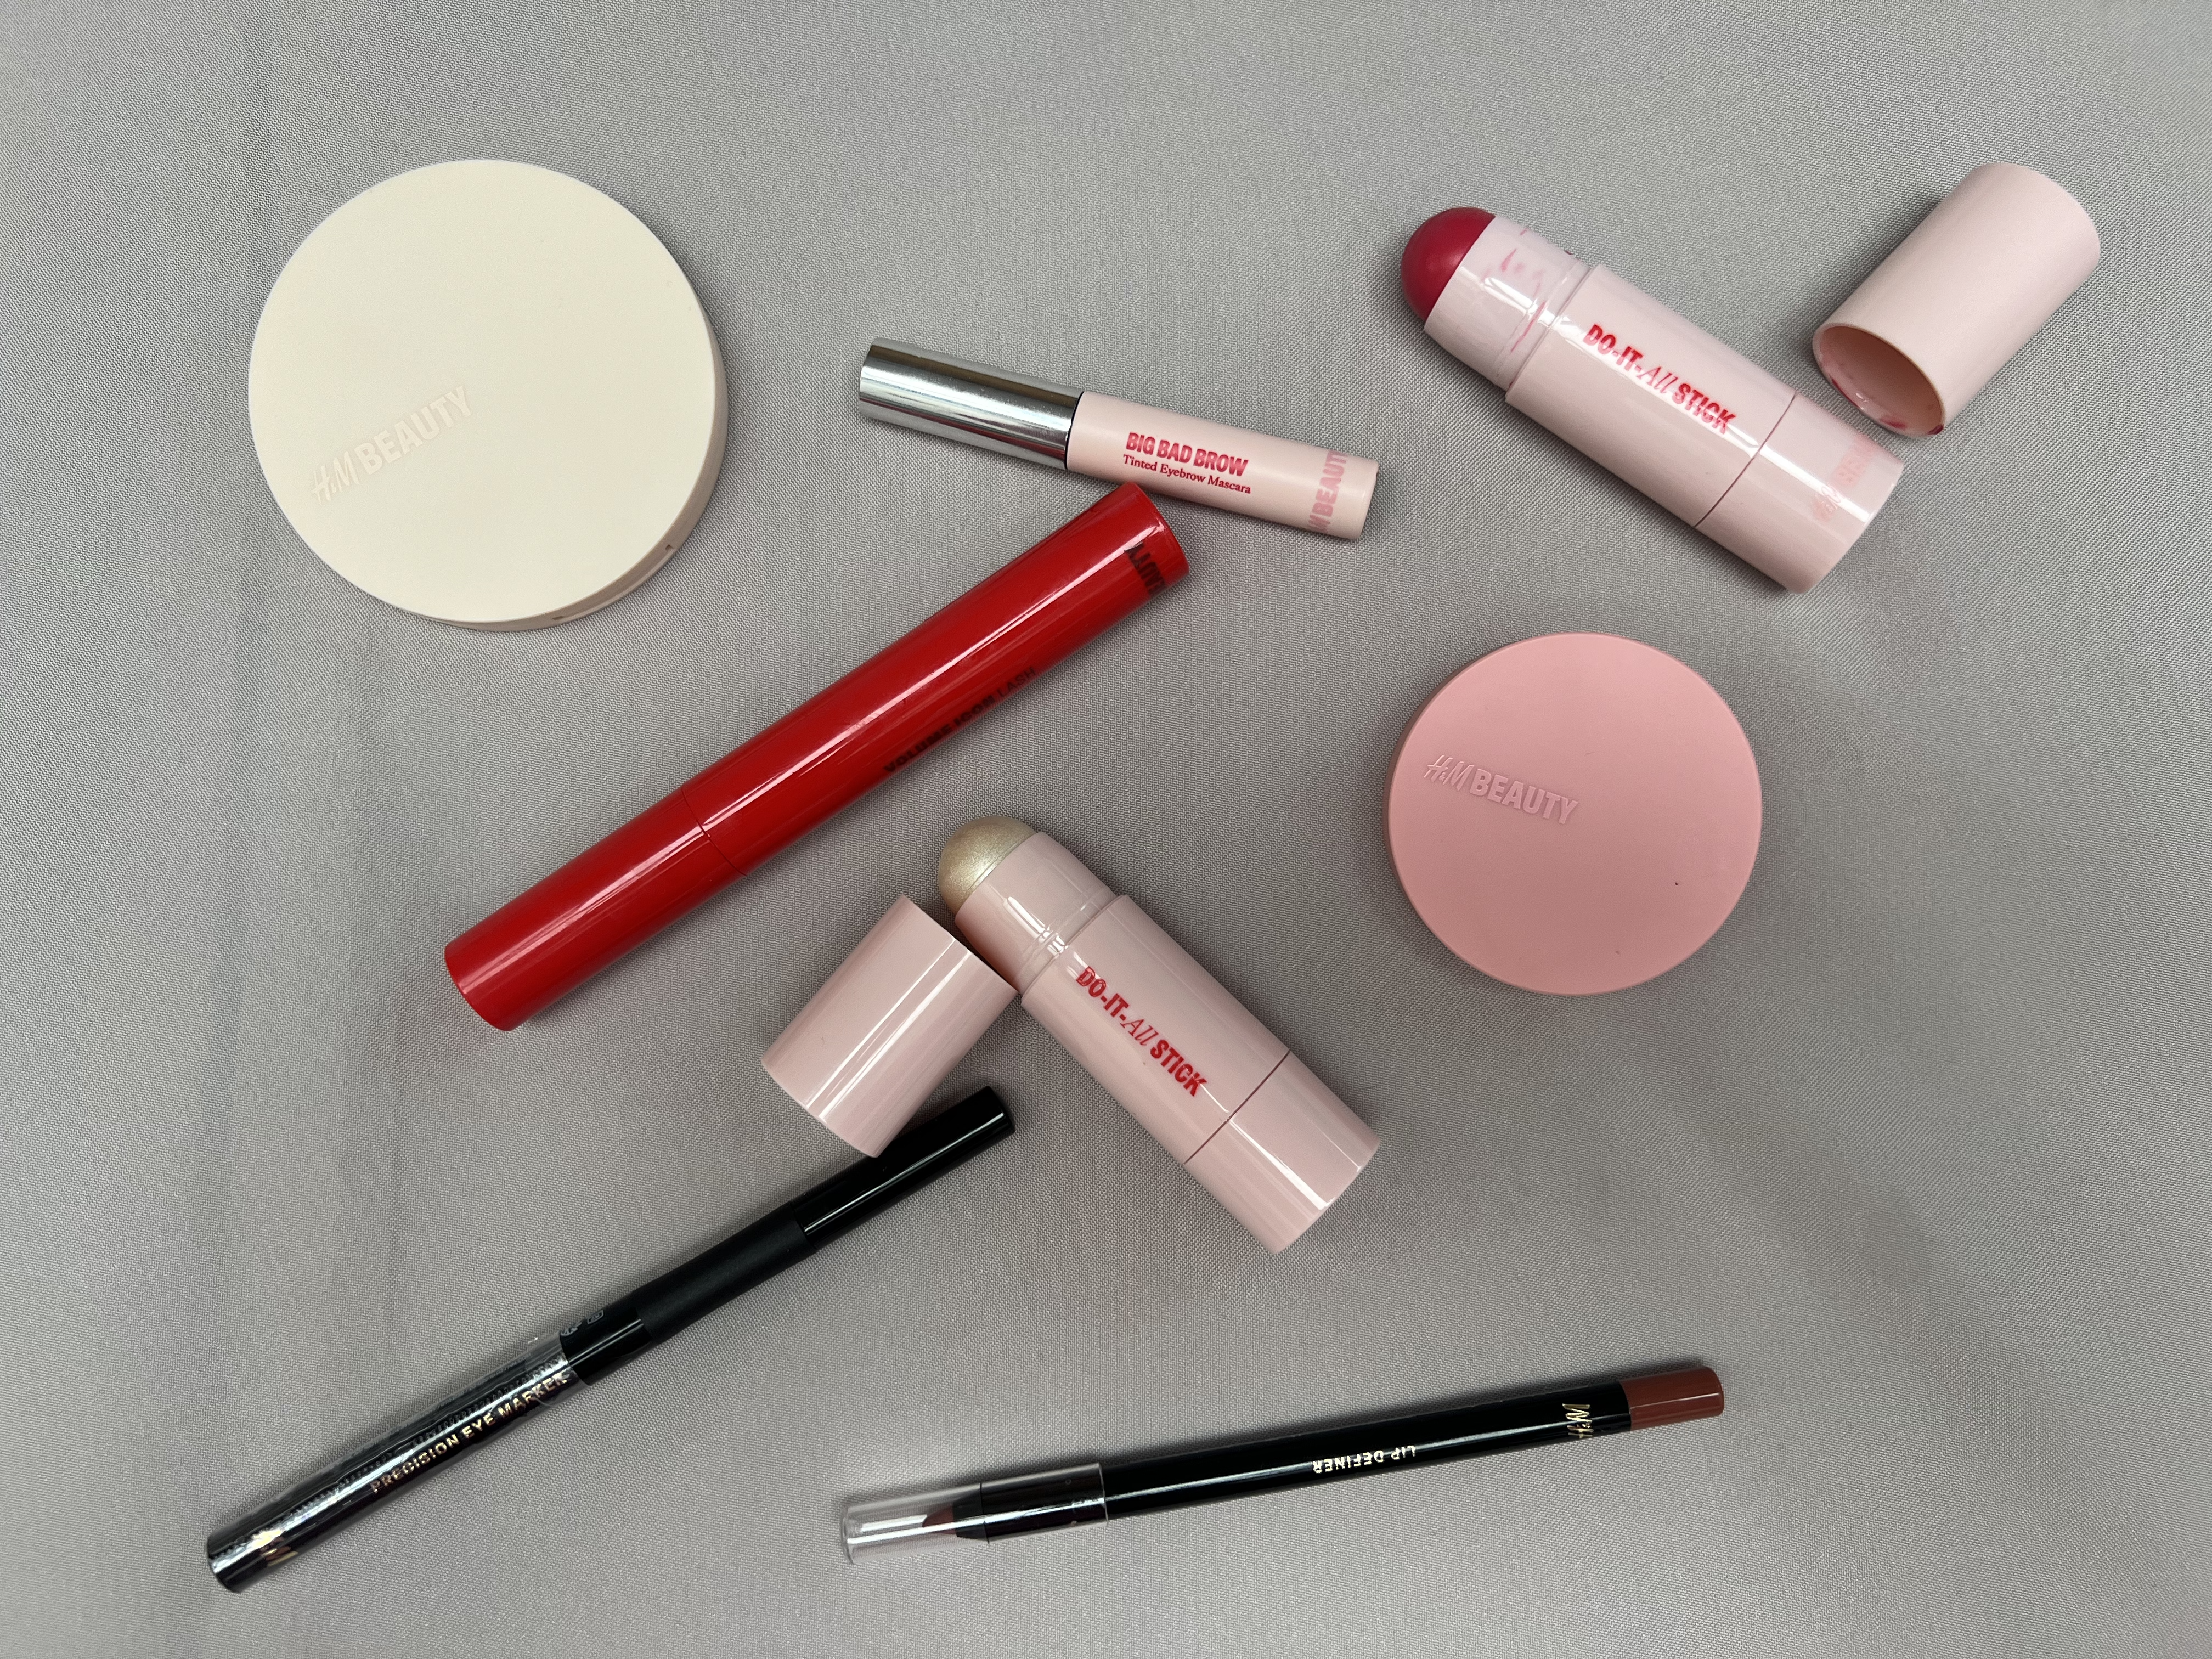 We tried a range of H&M Beauty products